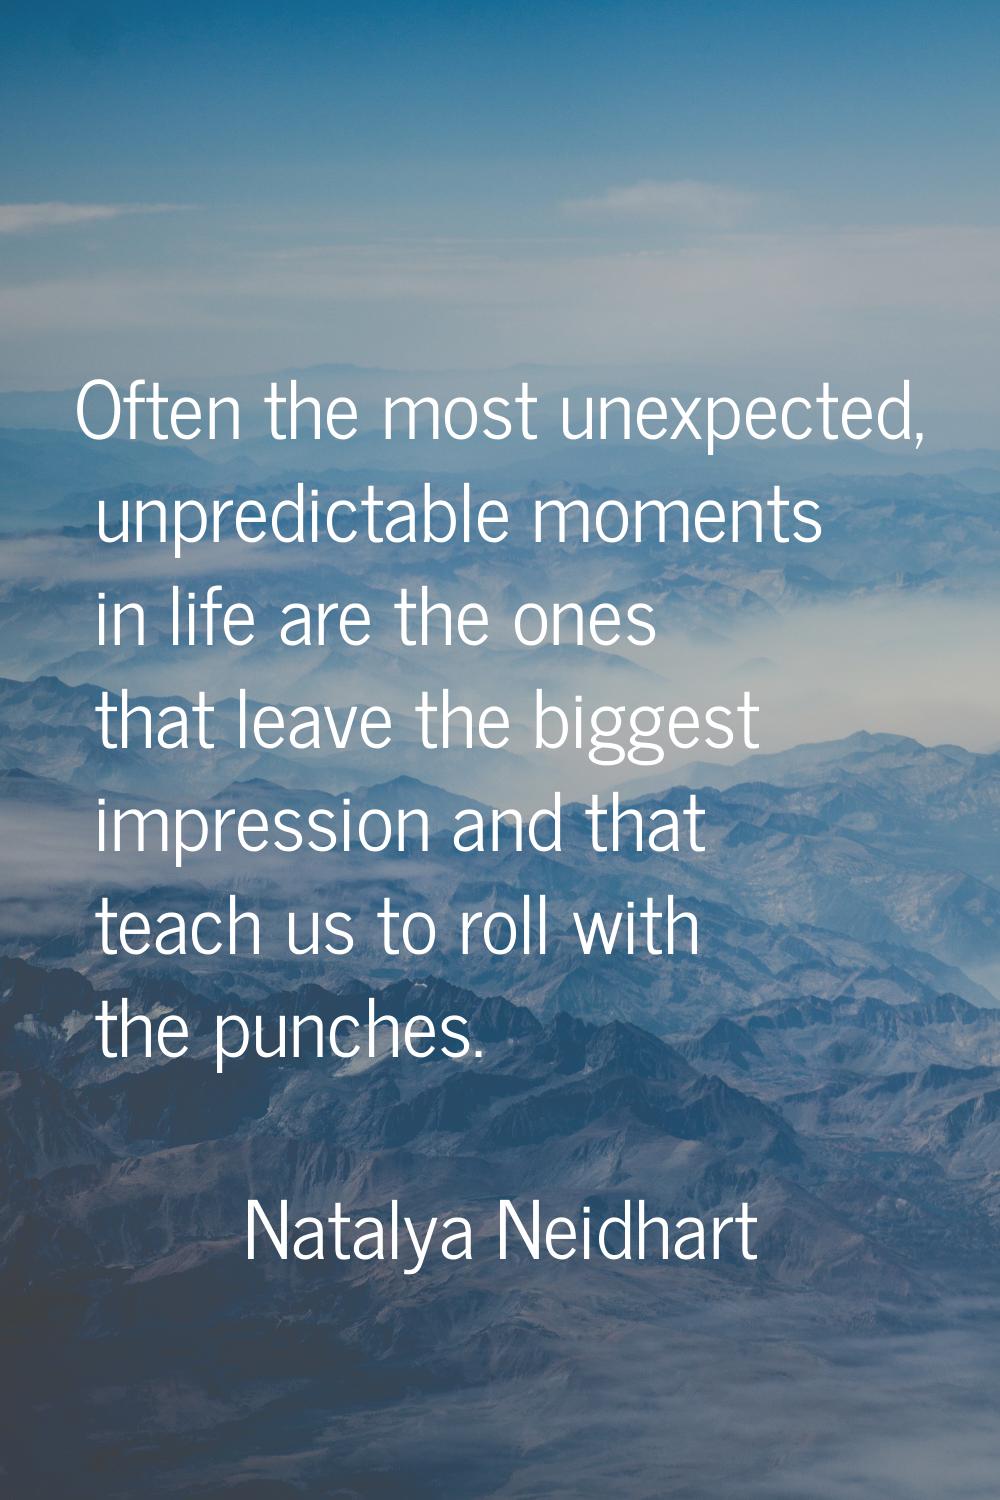 Often the most unexpected, unpredictable moments in life are the ones that leave the biggest impres